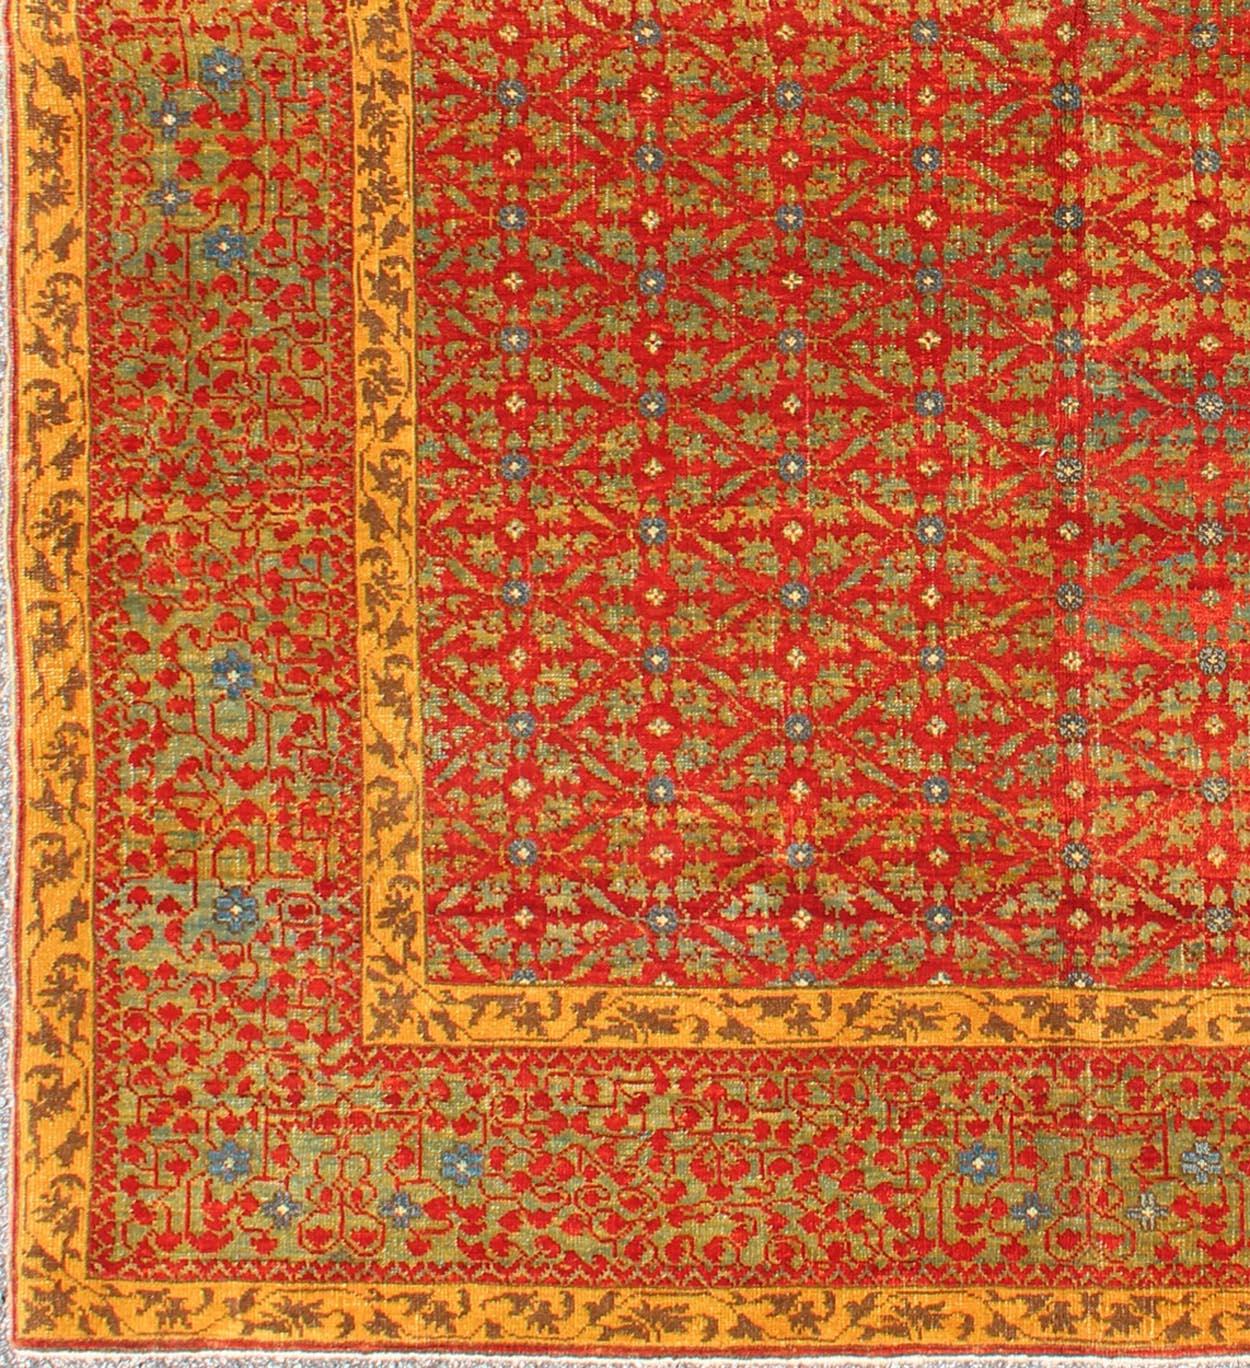 Oushak Square Sized Vintage Ottoman Rug with Repeating All-Over Design